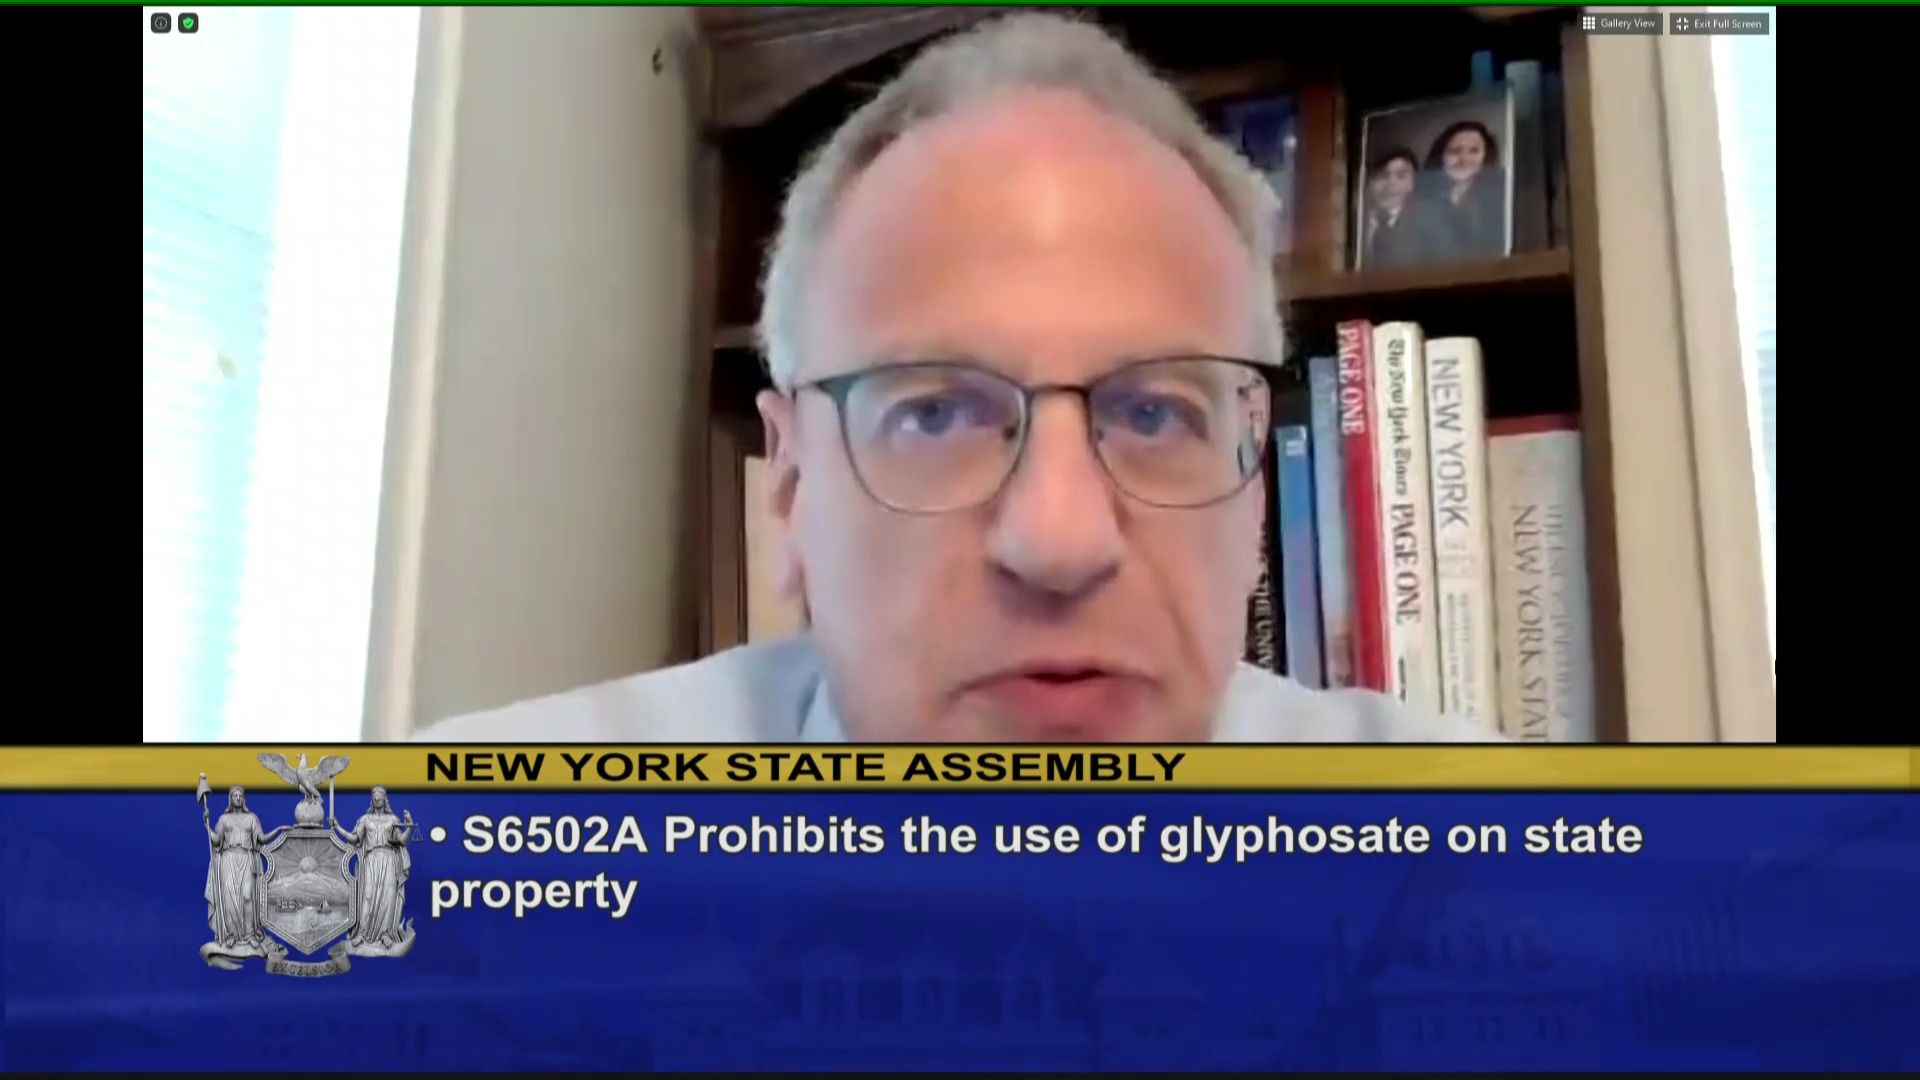 Prohibiting the Use of Glyphosate on State Property